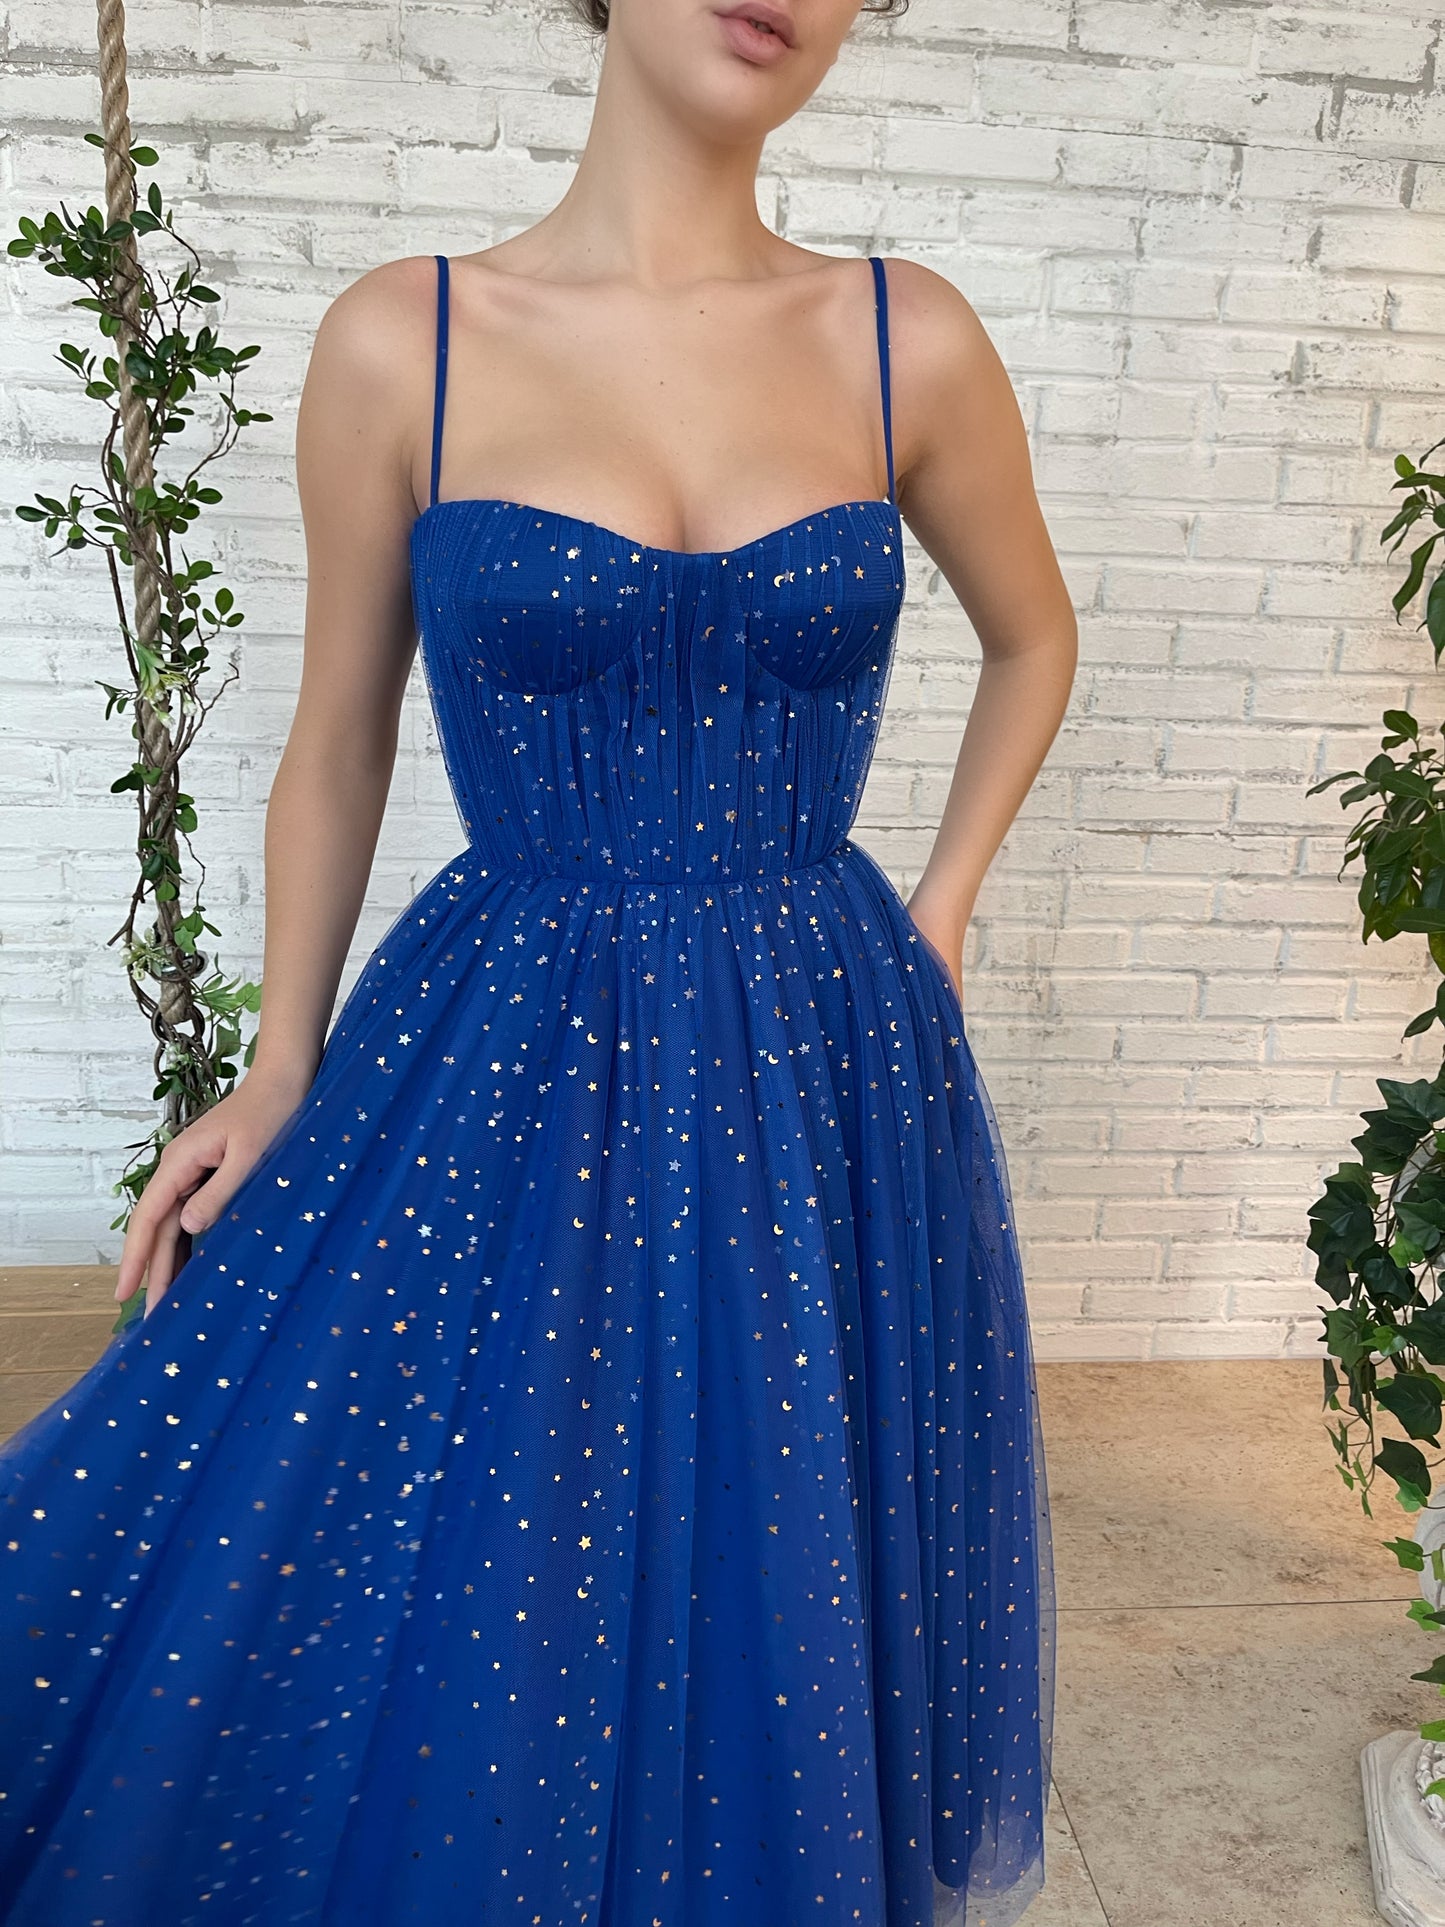 Blue midi dress with spaghetti straps and starry fabric